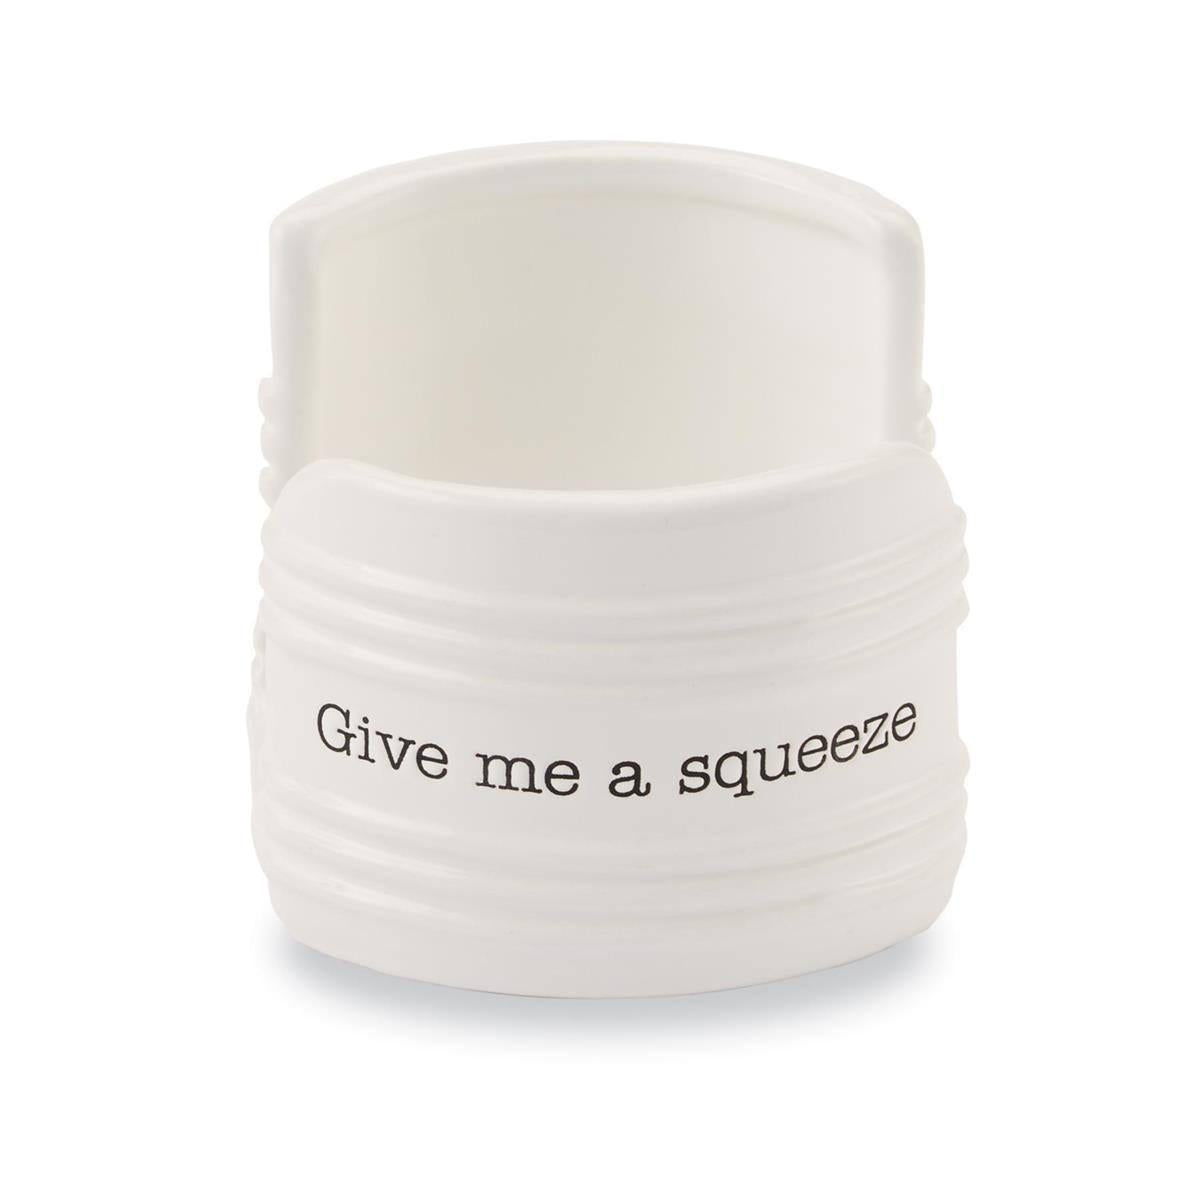 chic and functional white  ceramic sponge holder with the legend "Give me a squeeze"